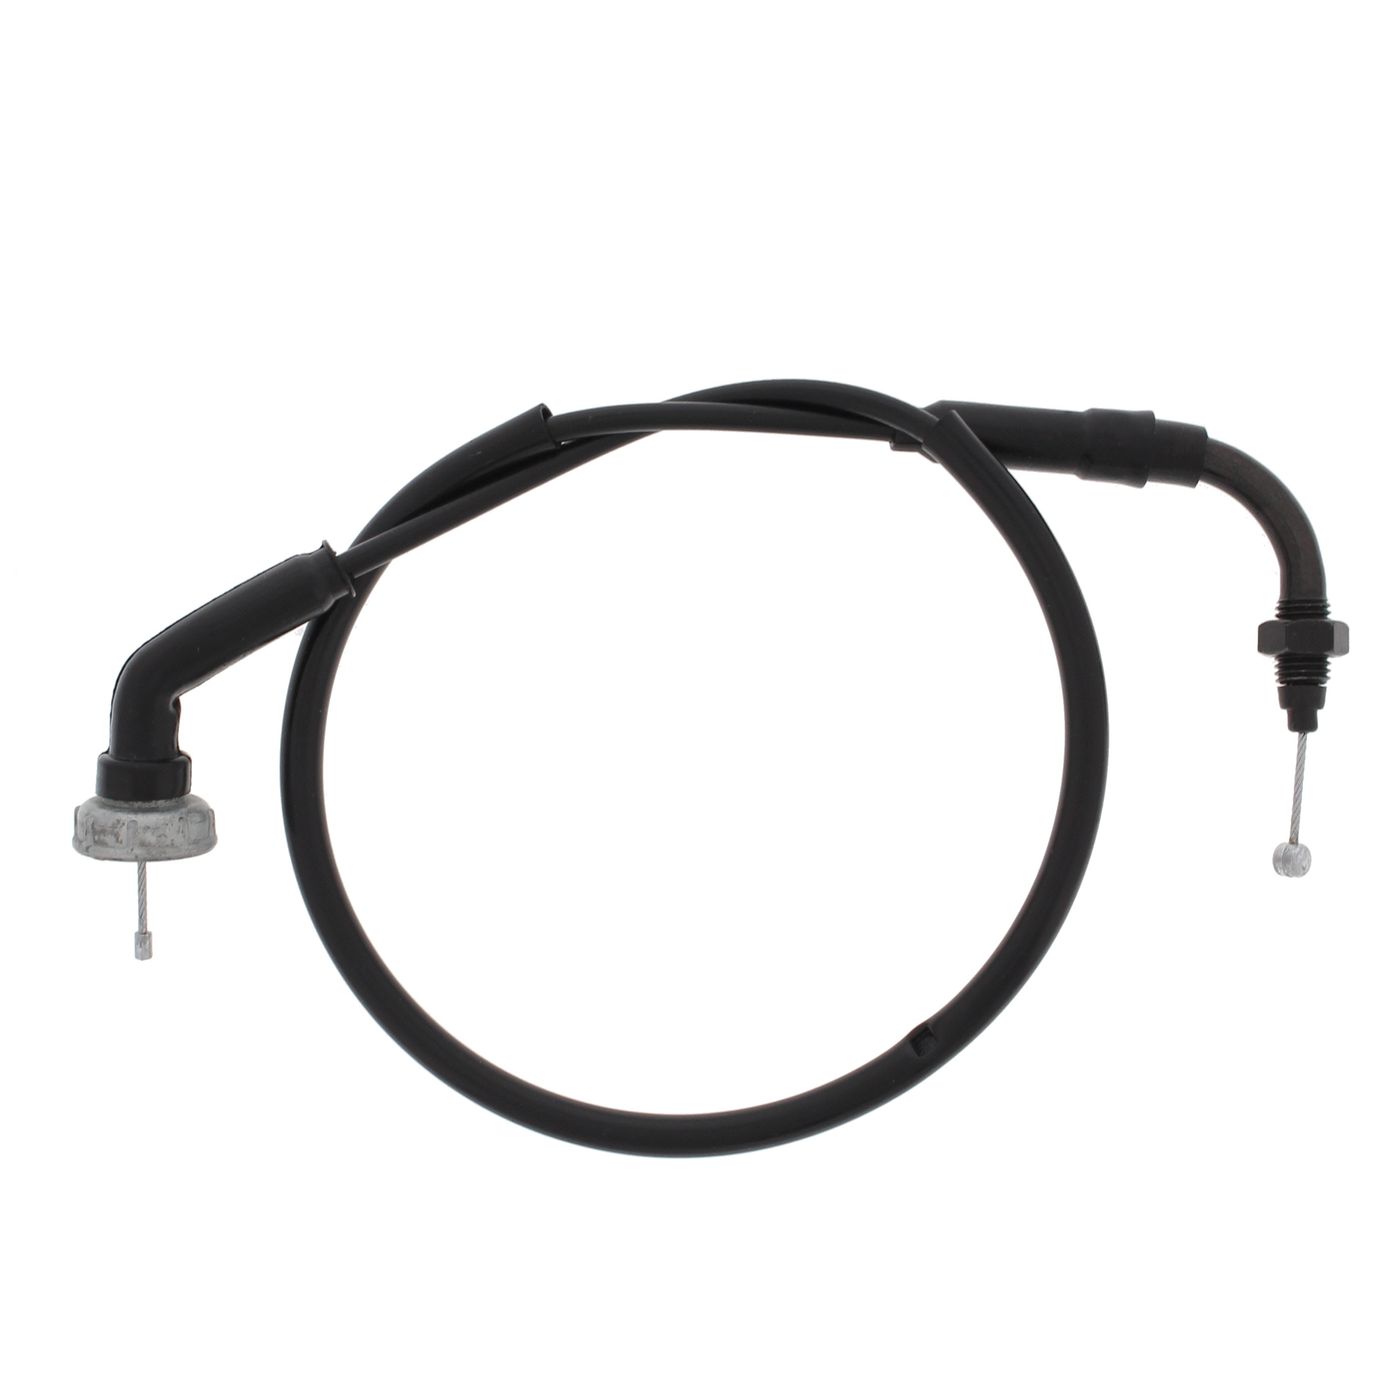 Wrp Throttle Cables - WRP451170 image